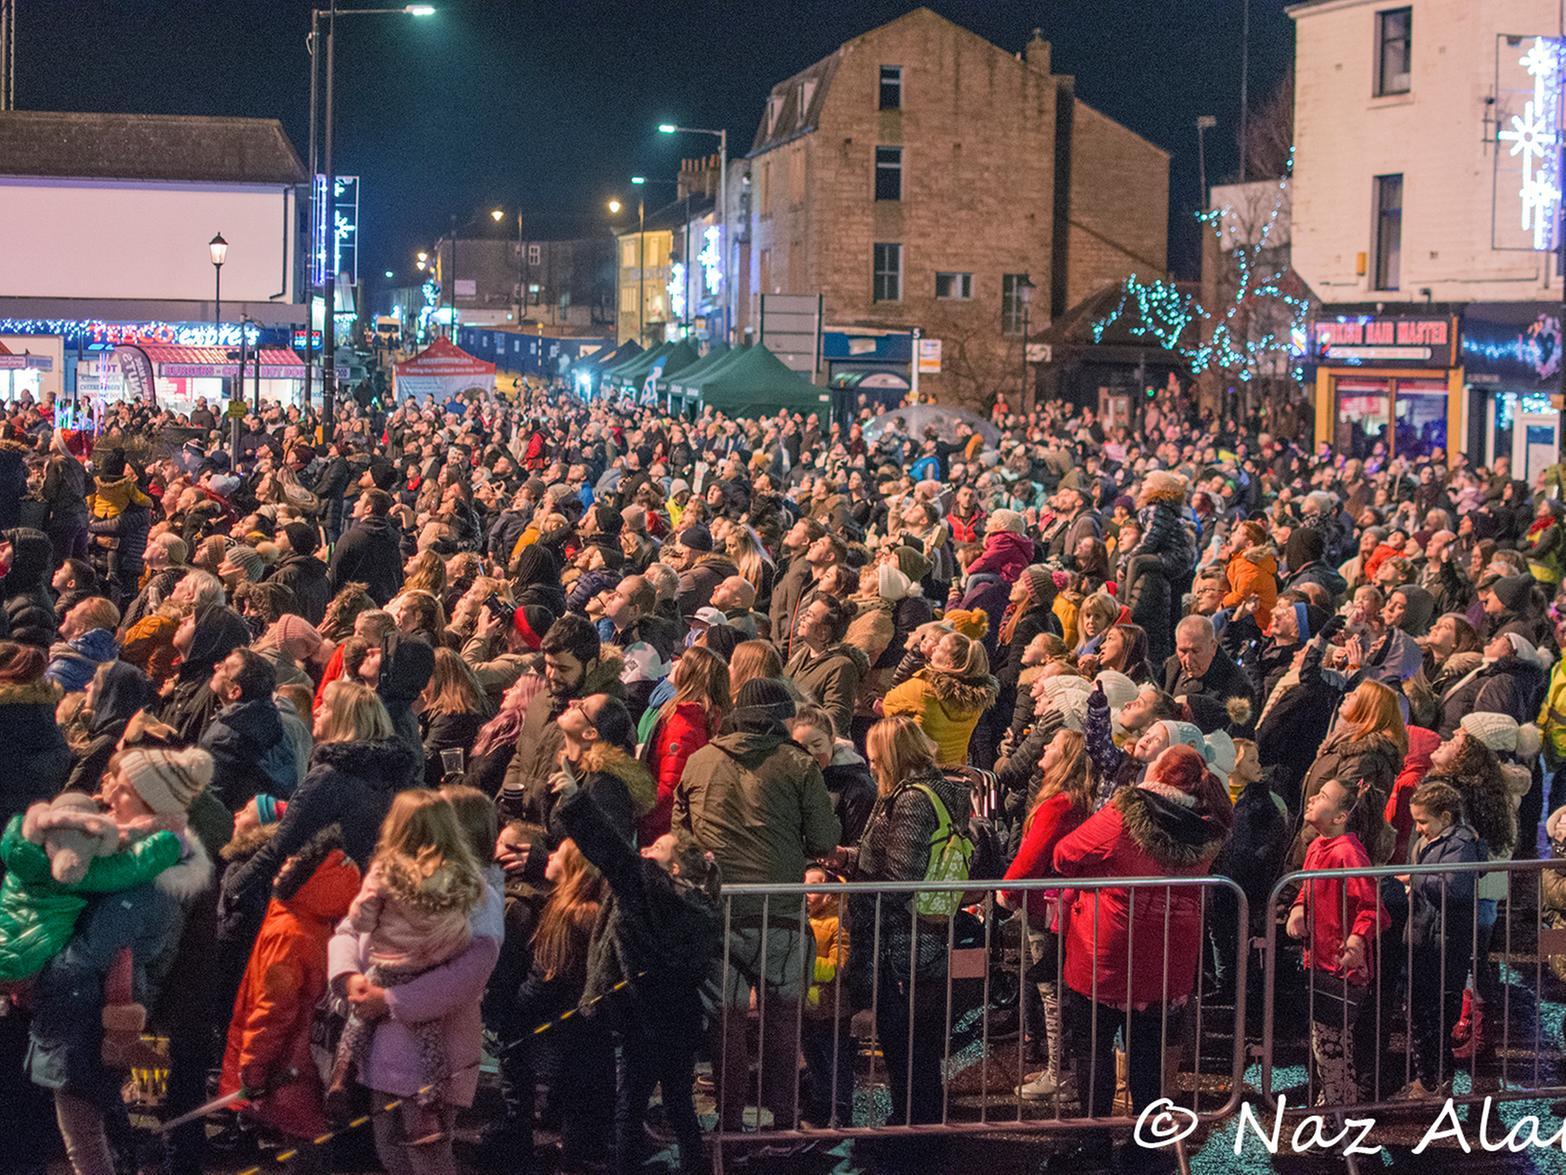 Christmas in Colne spectacular (Photo by Naz Alam)